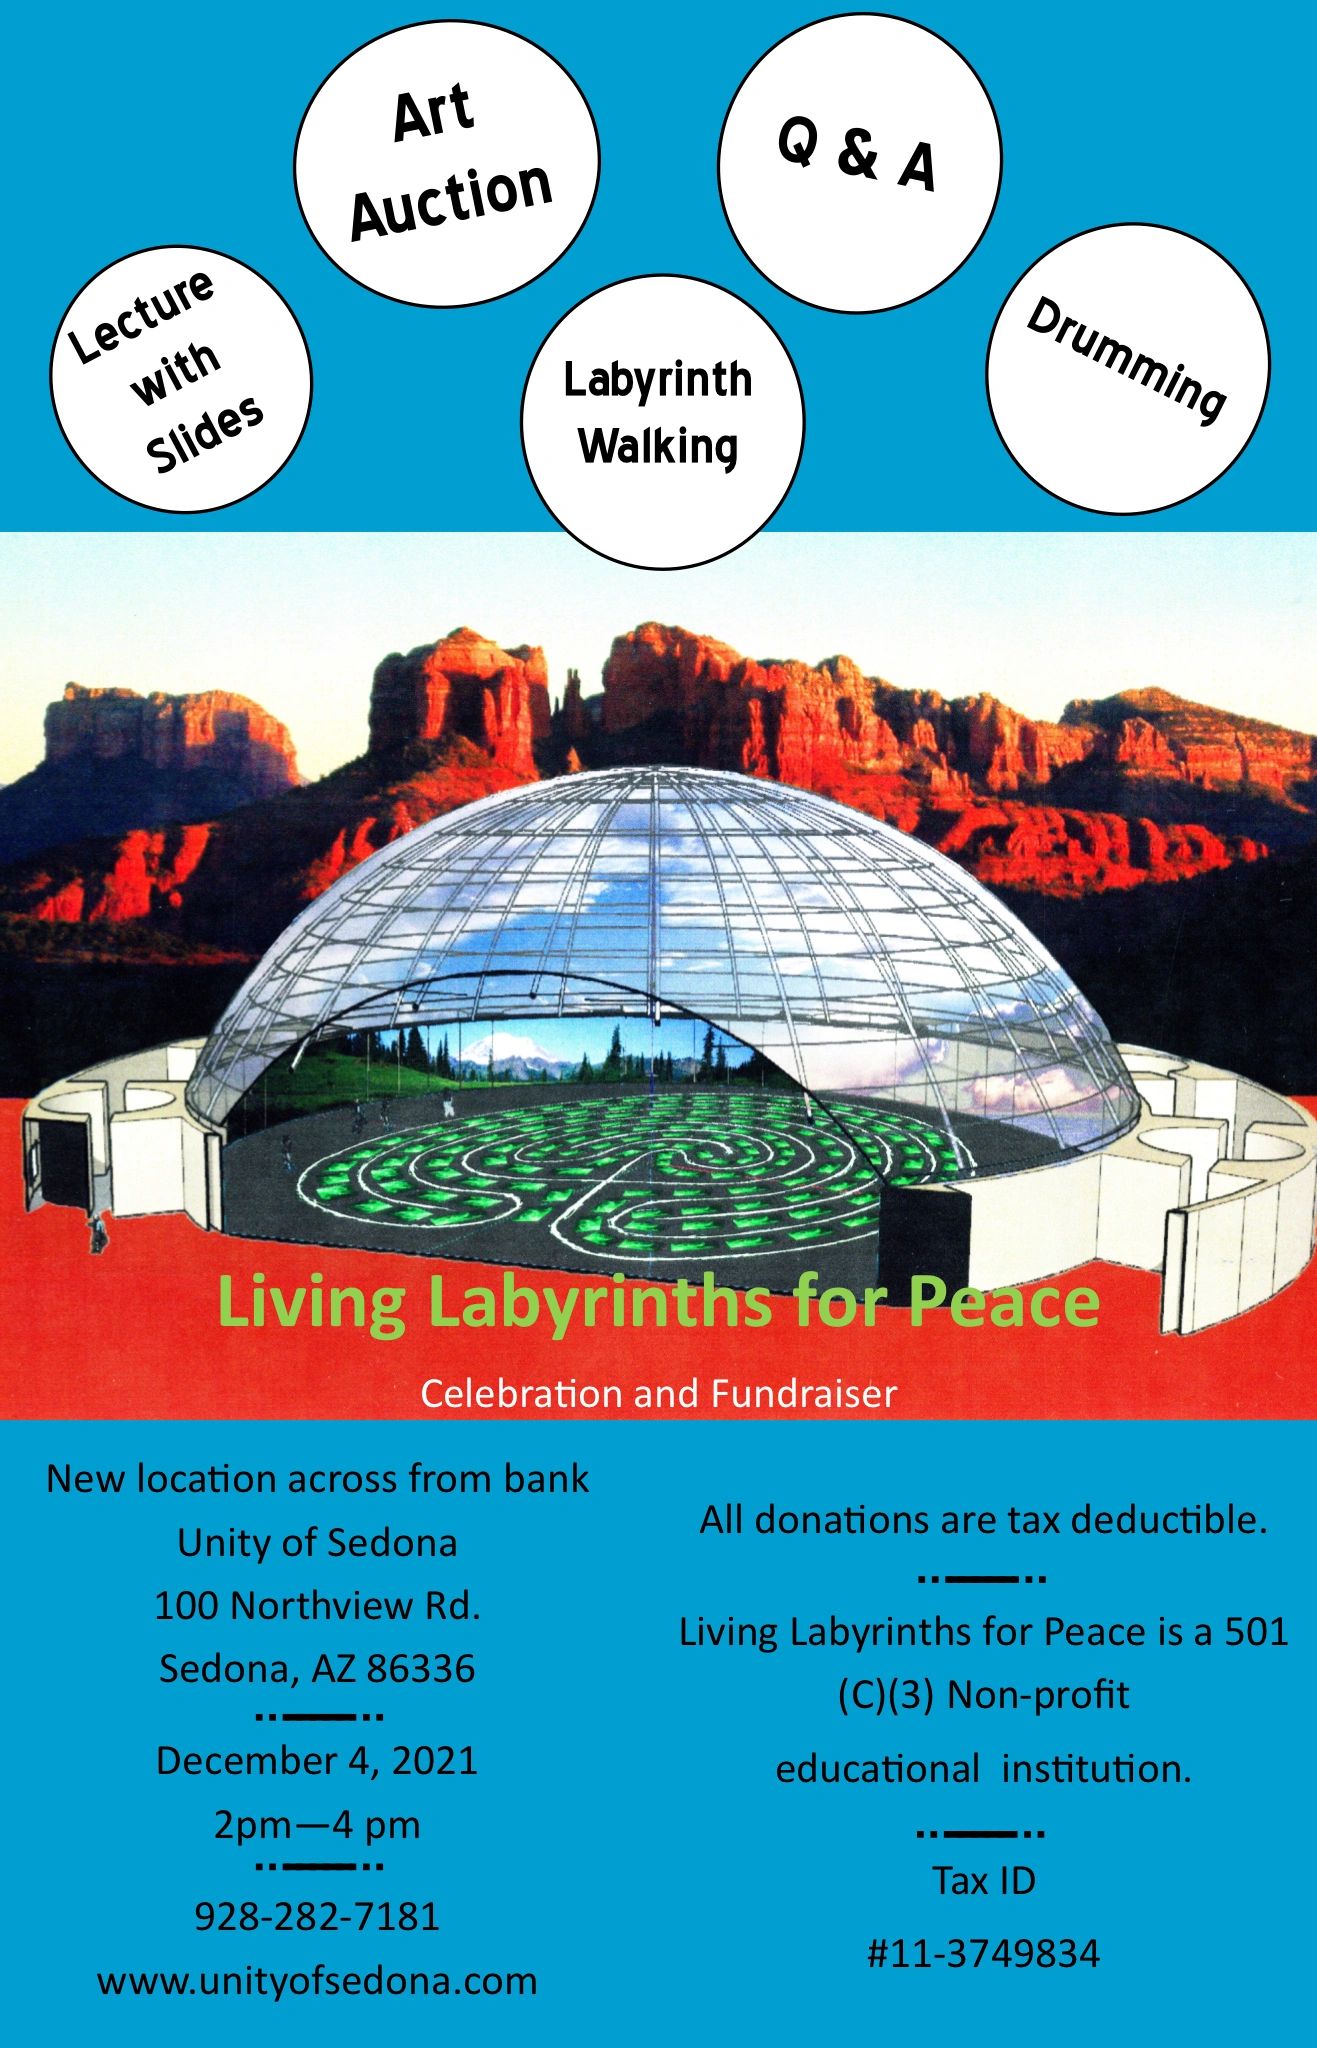 Celebration and Fundraiser
Living Labyrinths for Peace

December 4th 2021 2-4pm
At: Unity of Sedona